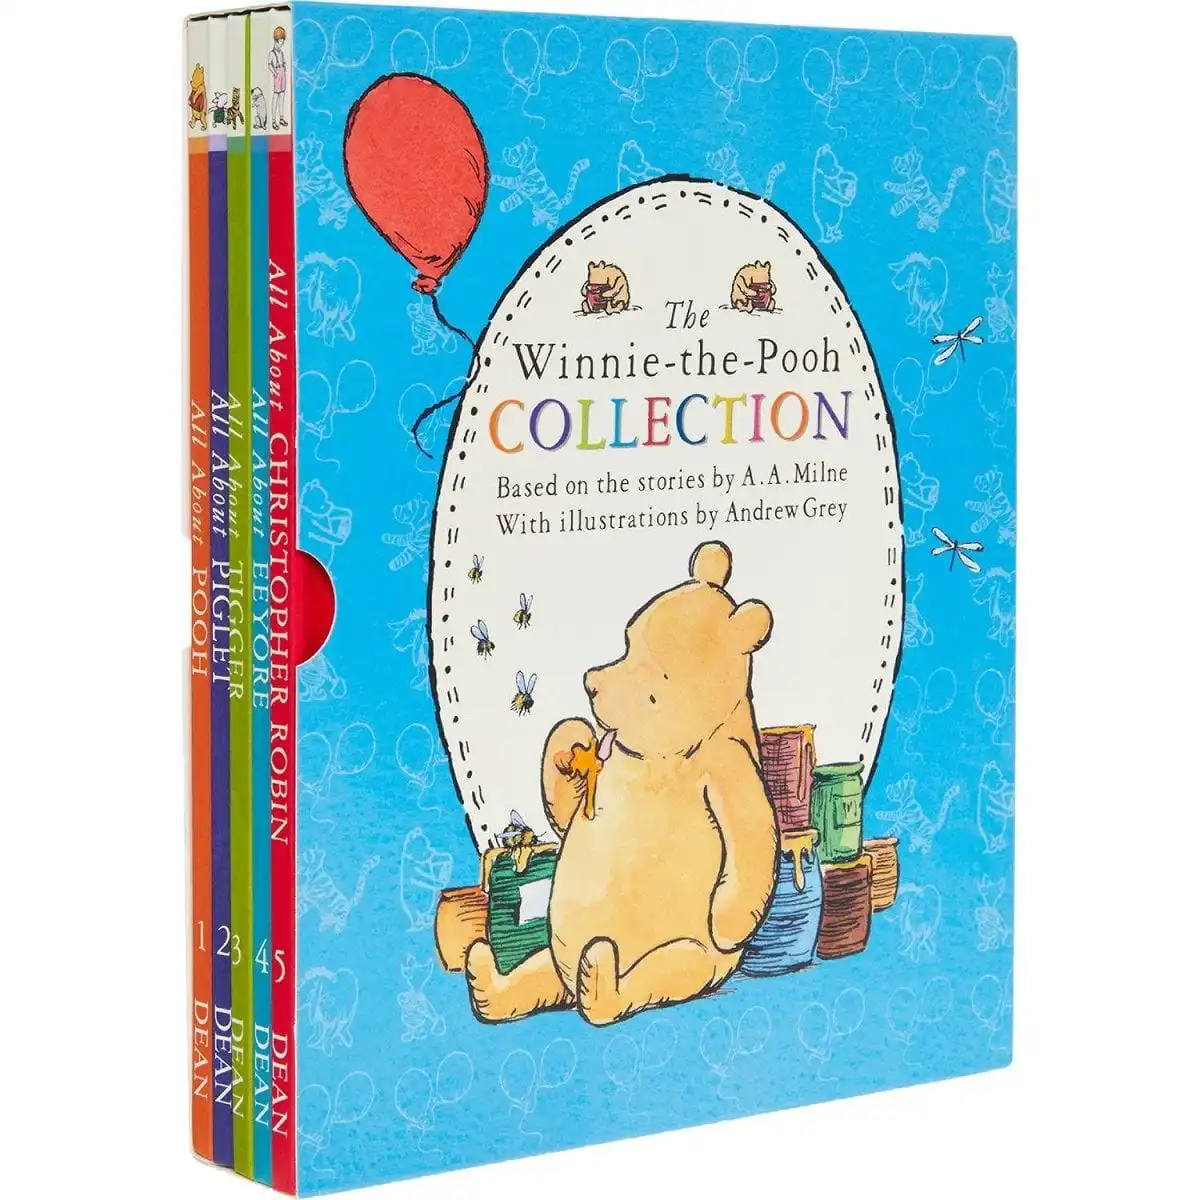 The Winnie the Pooh Collection